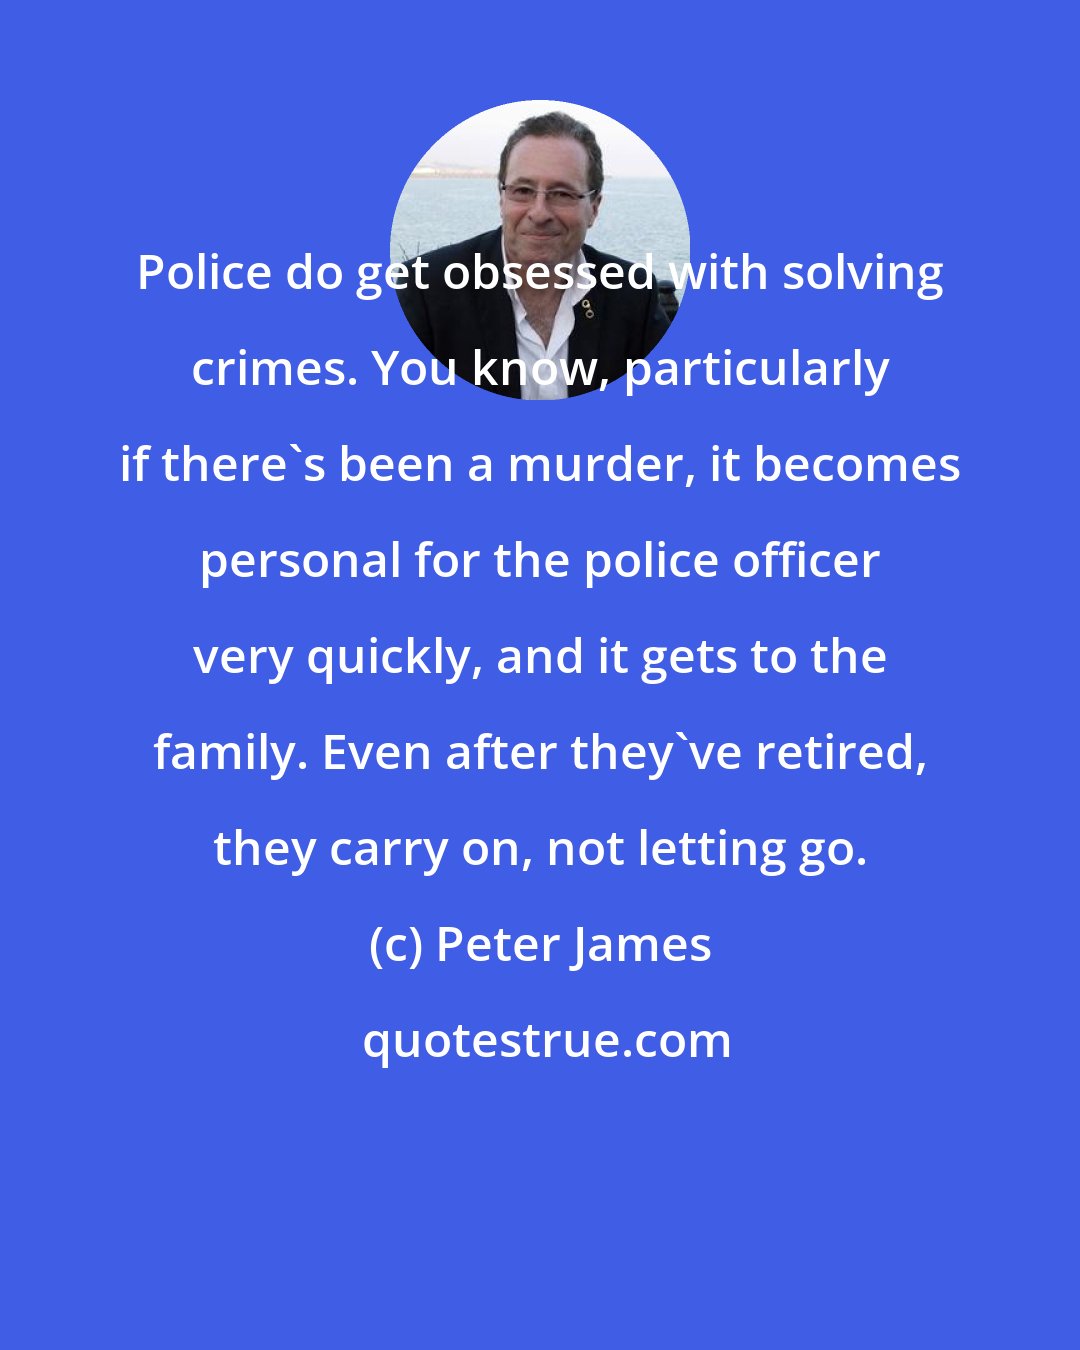 Peter James: Police do get obsessed with solving crimes. You know, particularly if there's been a murder, it becomes personal for the police officer very quickly, and it gets to the family. Even after they've retired, they carry on, not letting go.